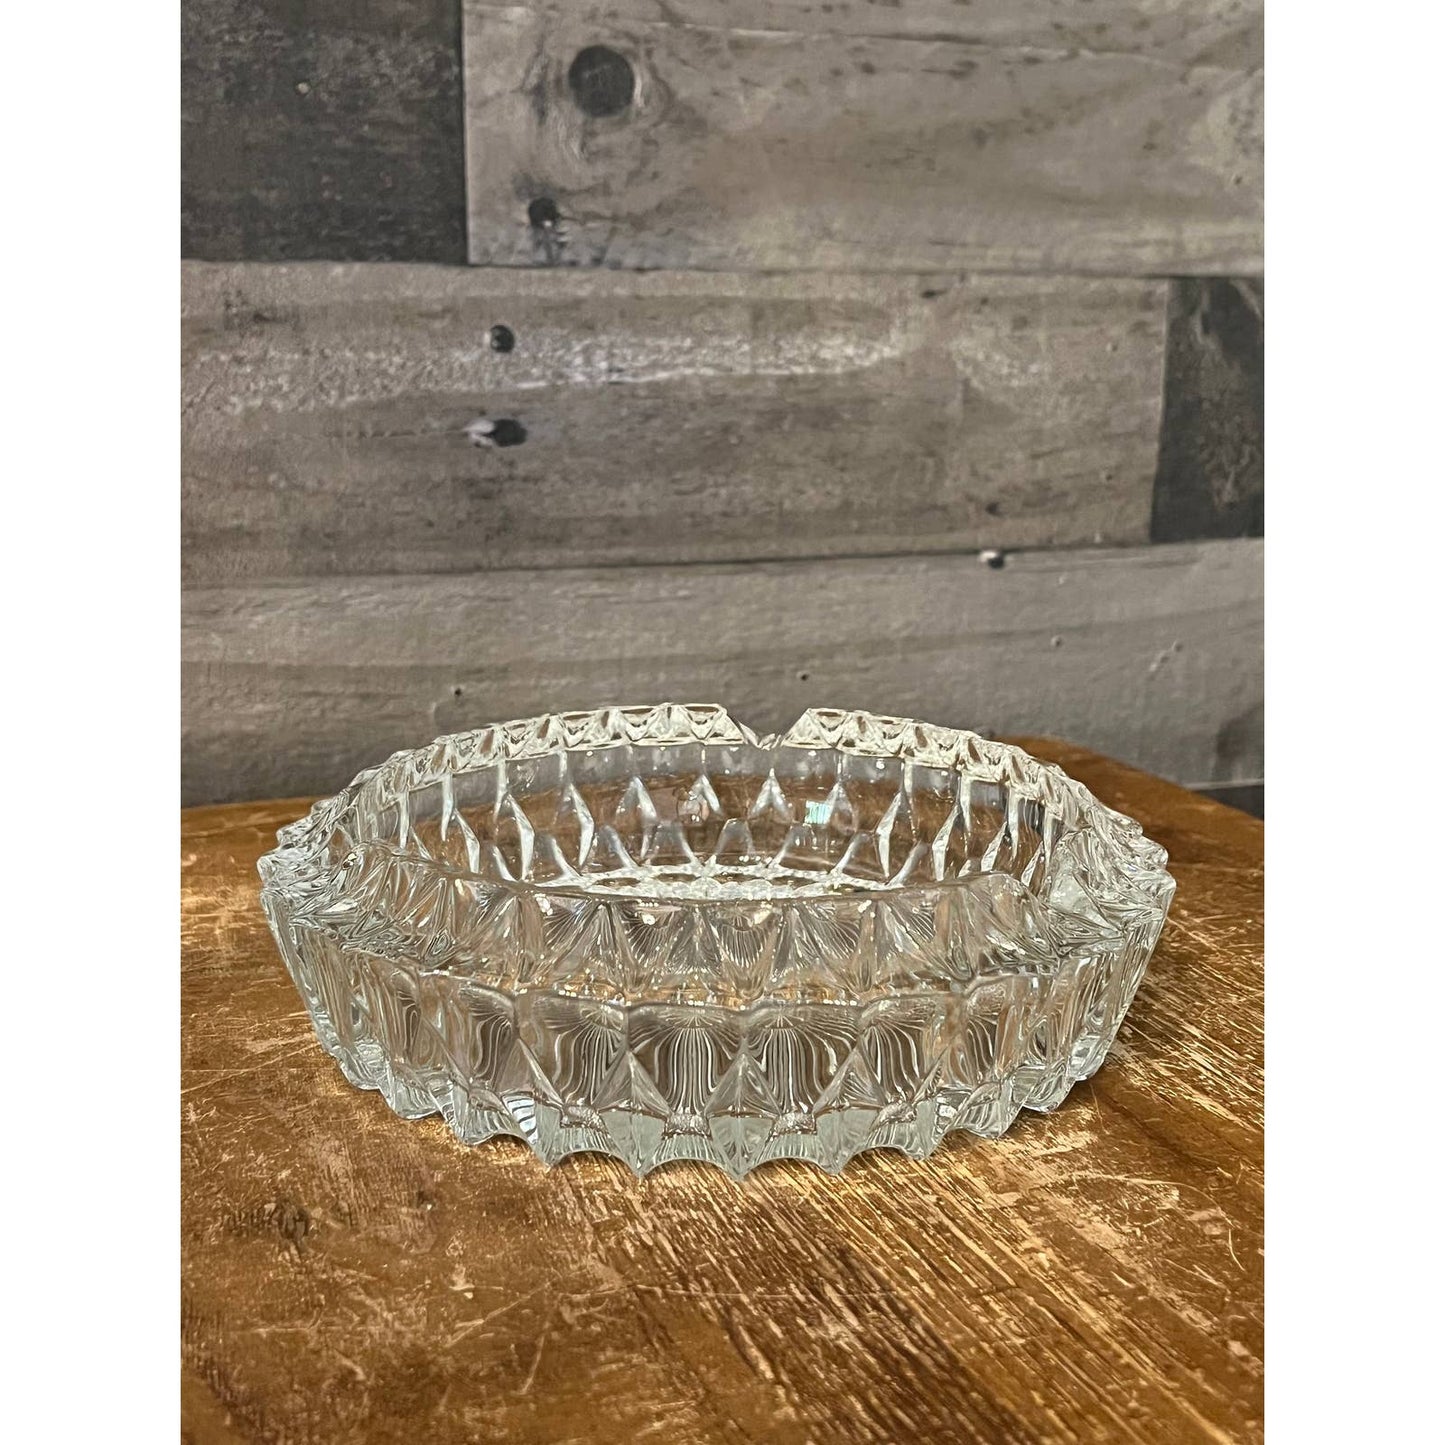 Vintage thick cut heavy crystal glass ashtray